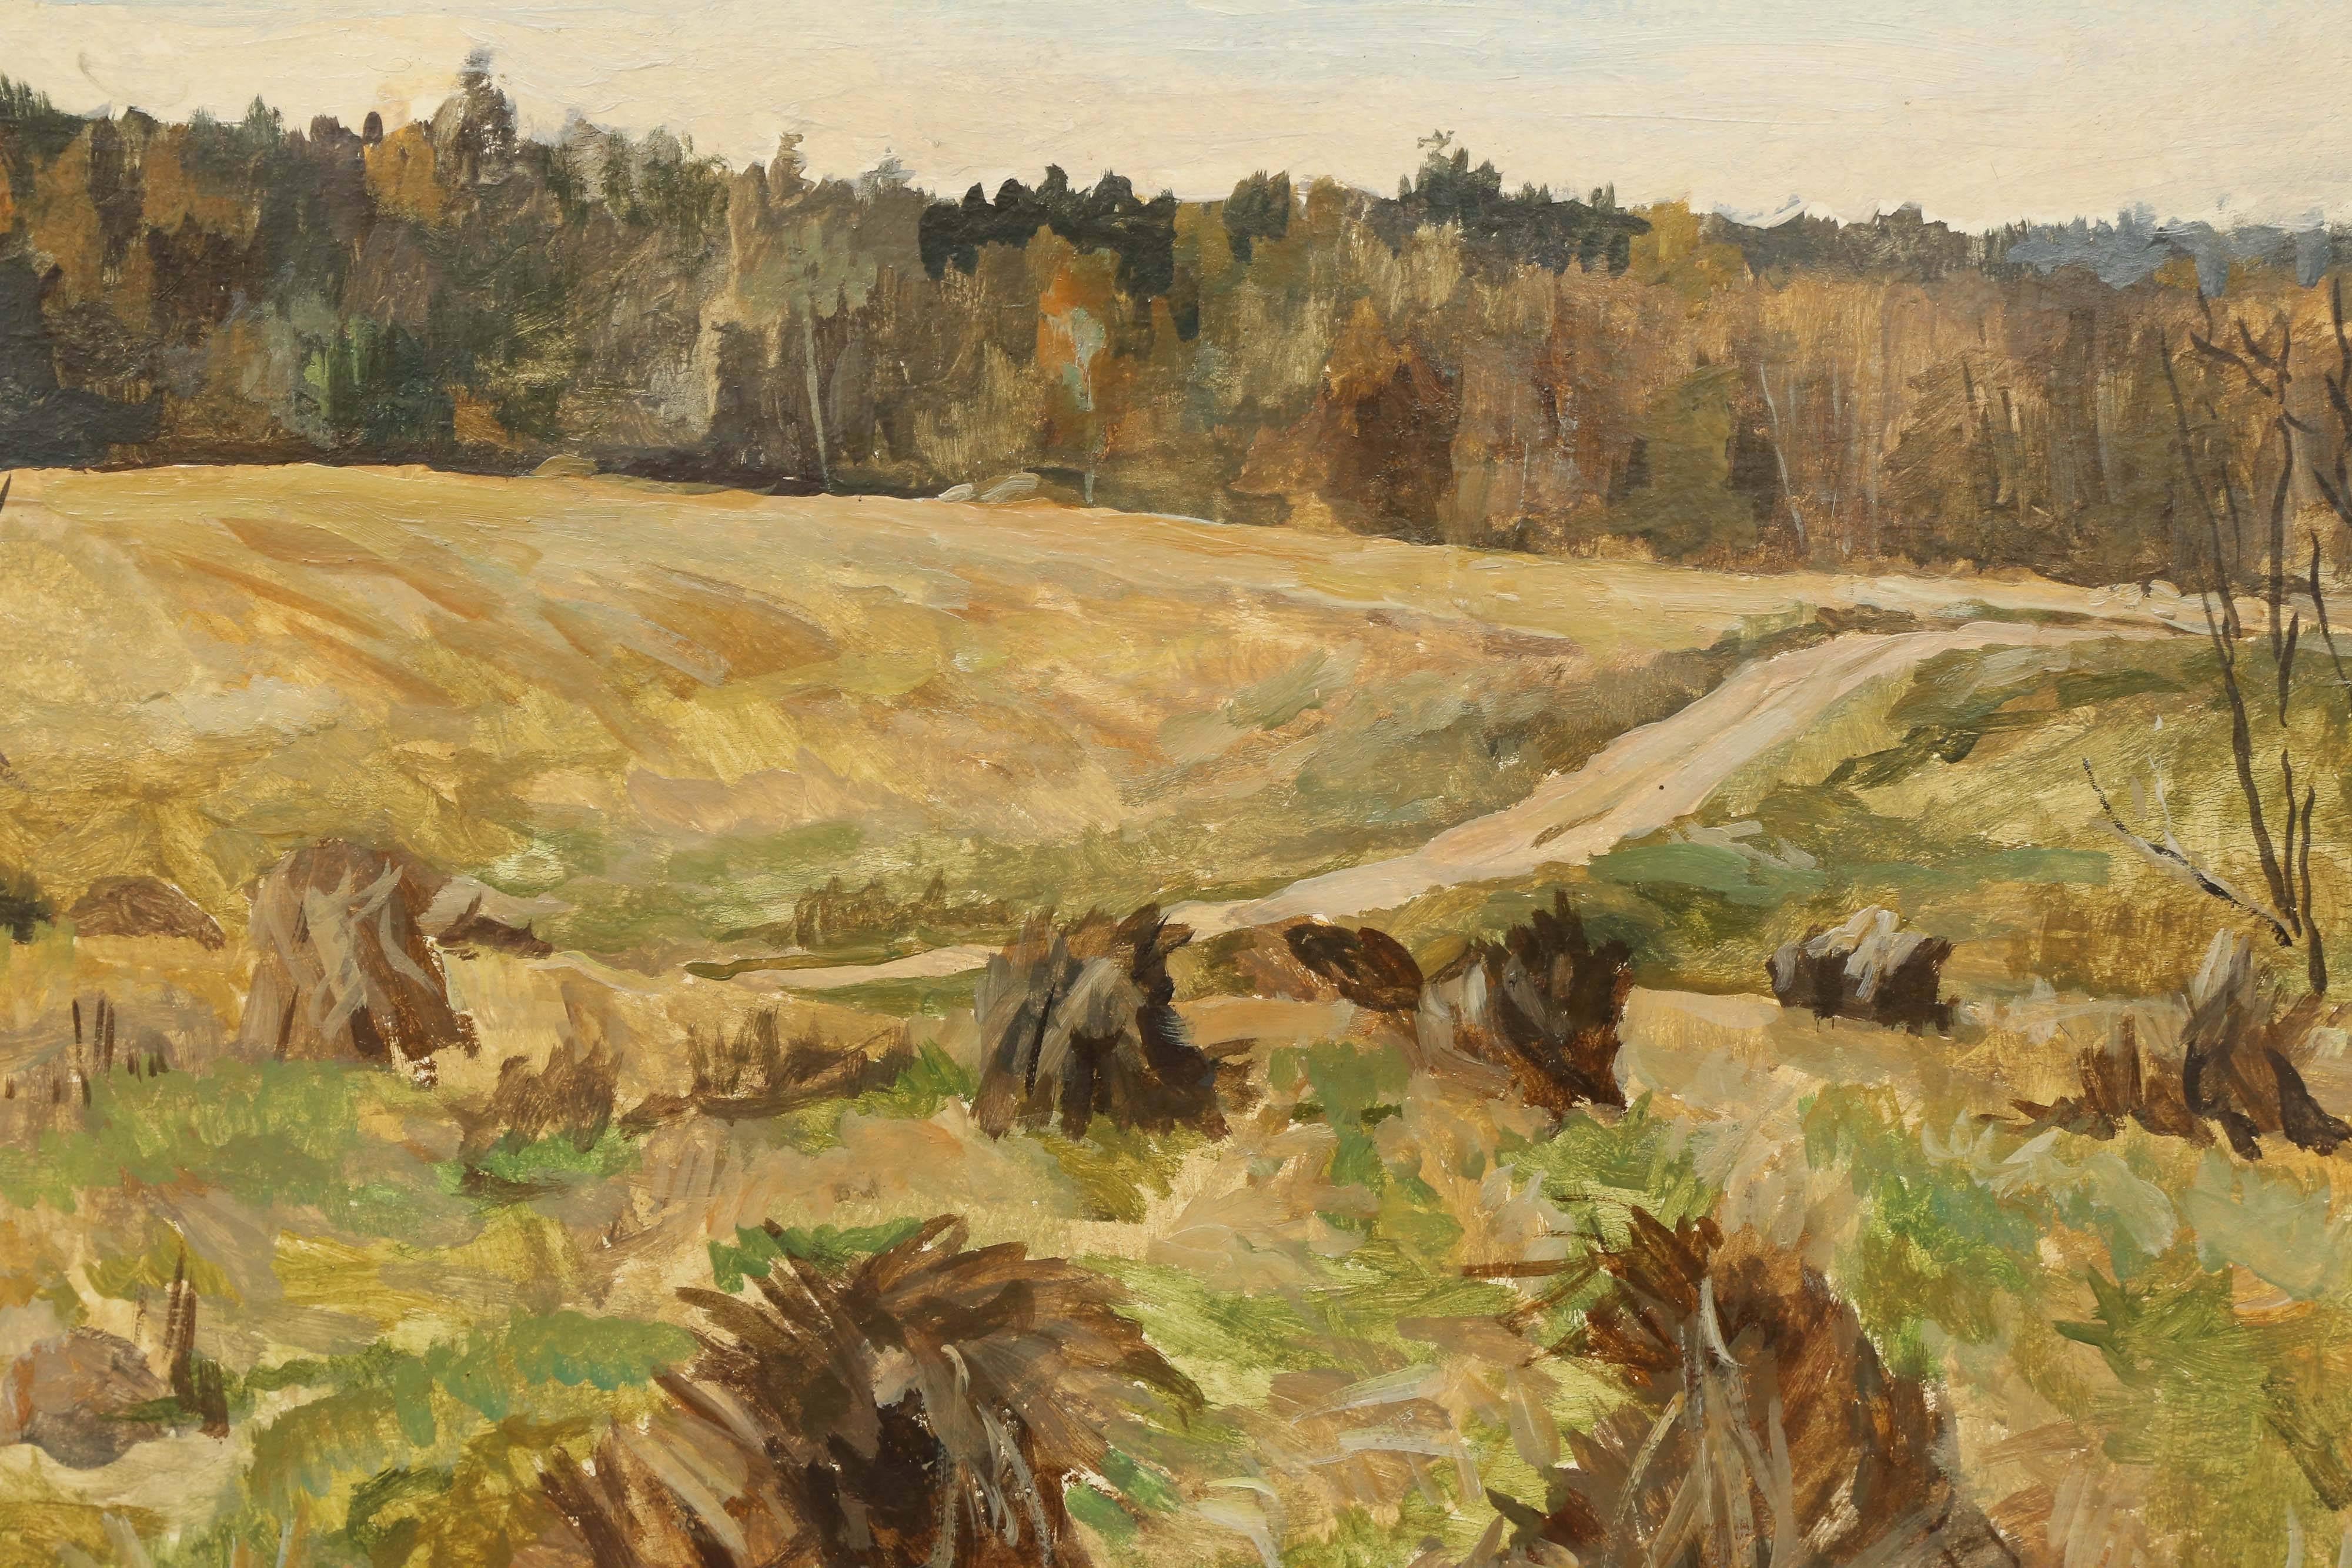 Soviet/Russian painter. 

“Landscape with haystacks” 1984.

 Oil on artist’s board. Signed and dated on lower right.
 13” H x 19’ W, overall size is 20” H x 26” W.
 Condition is excellent.
    